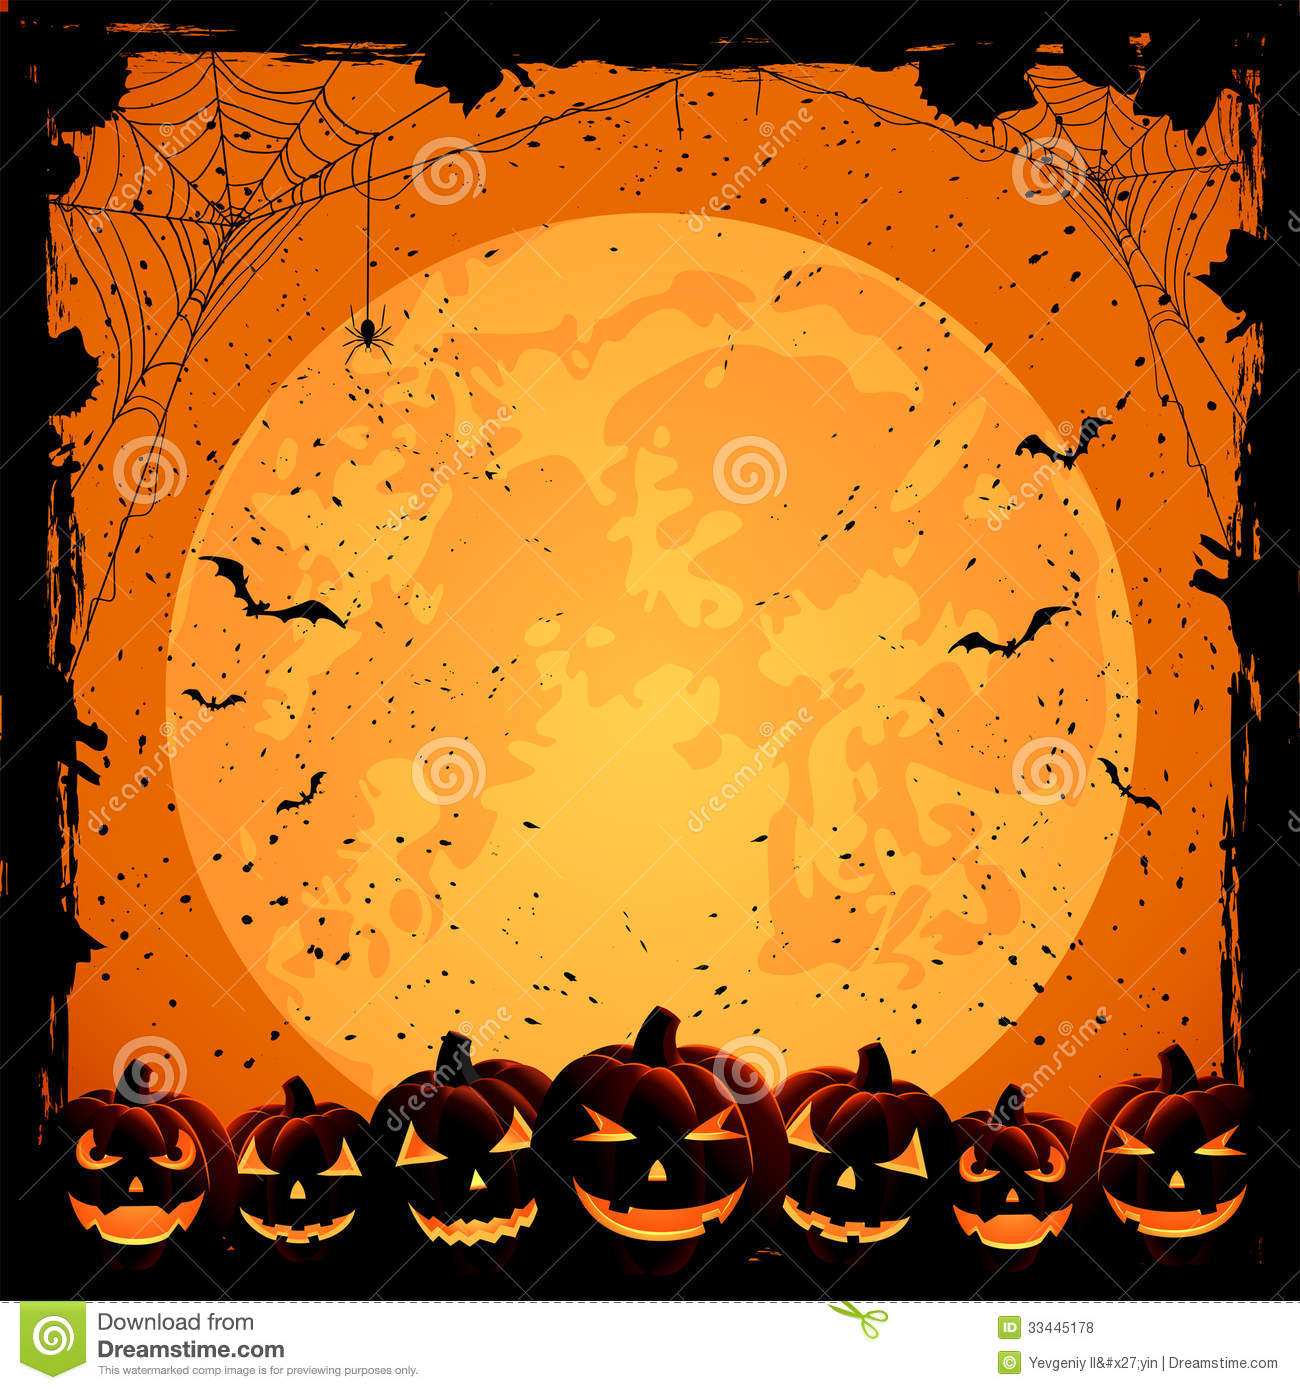 halloween background, halloween backgrounds images festival collections #27446